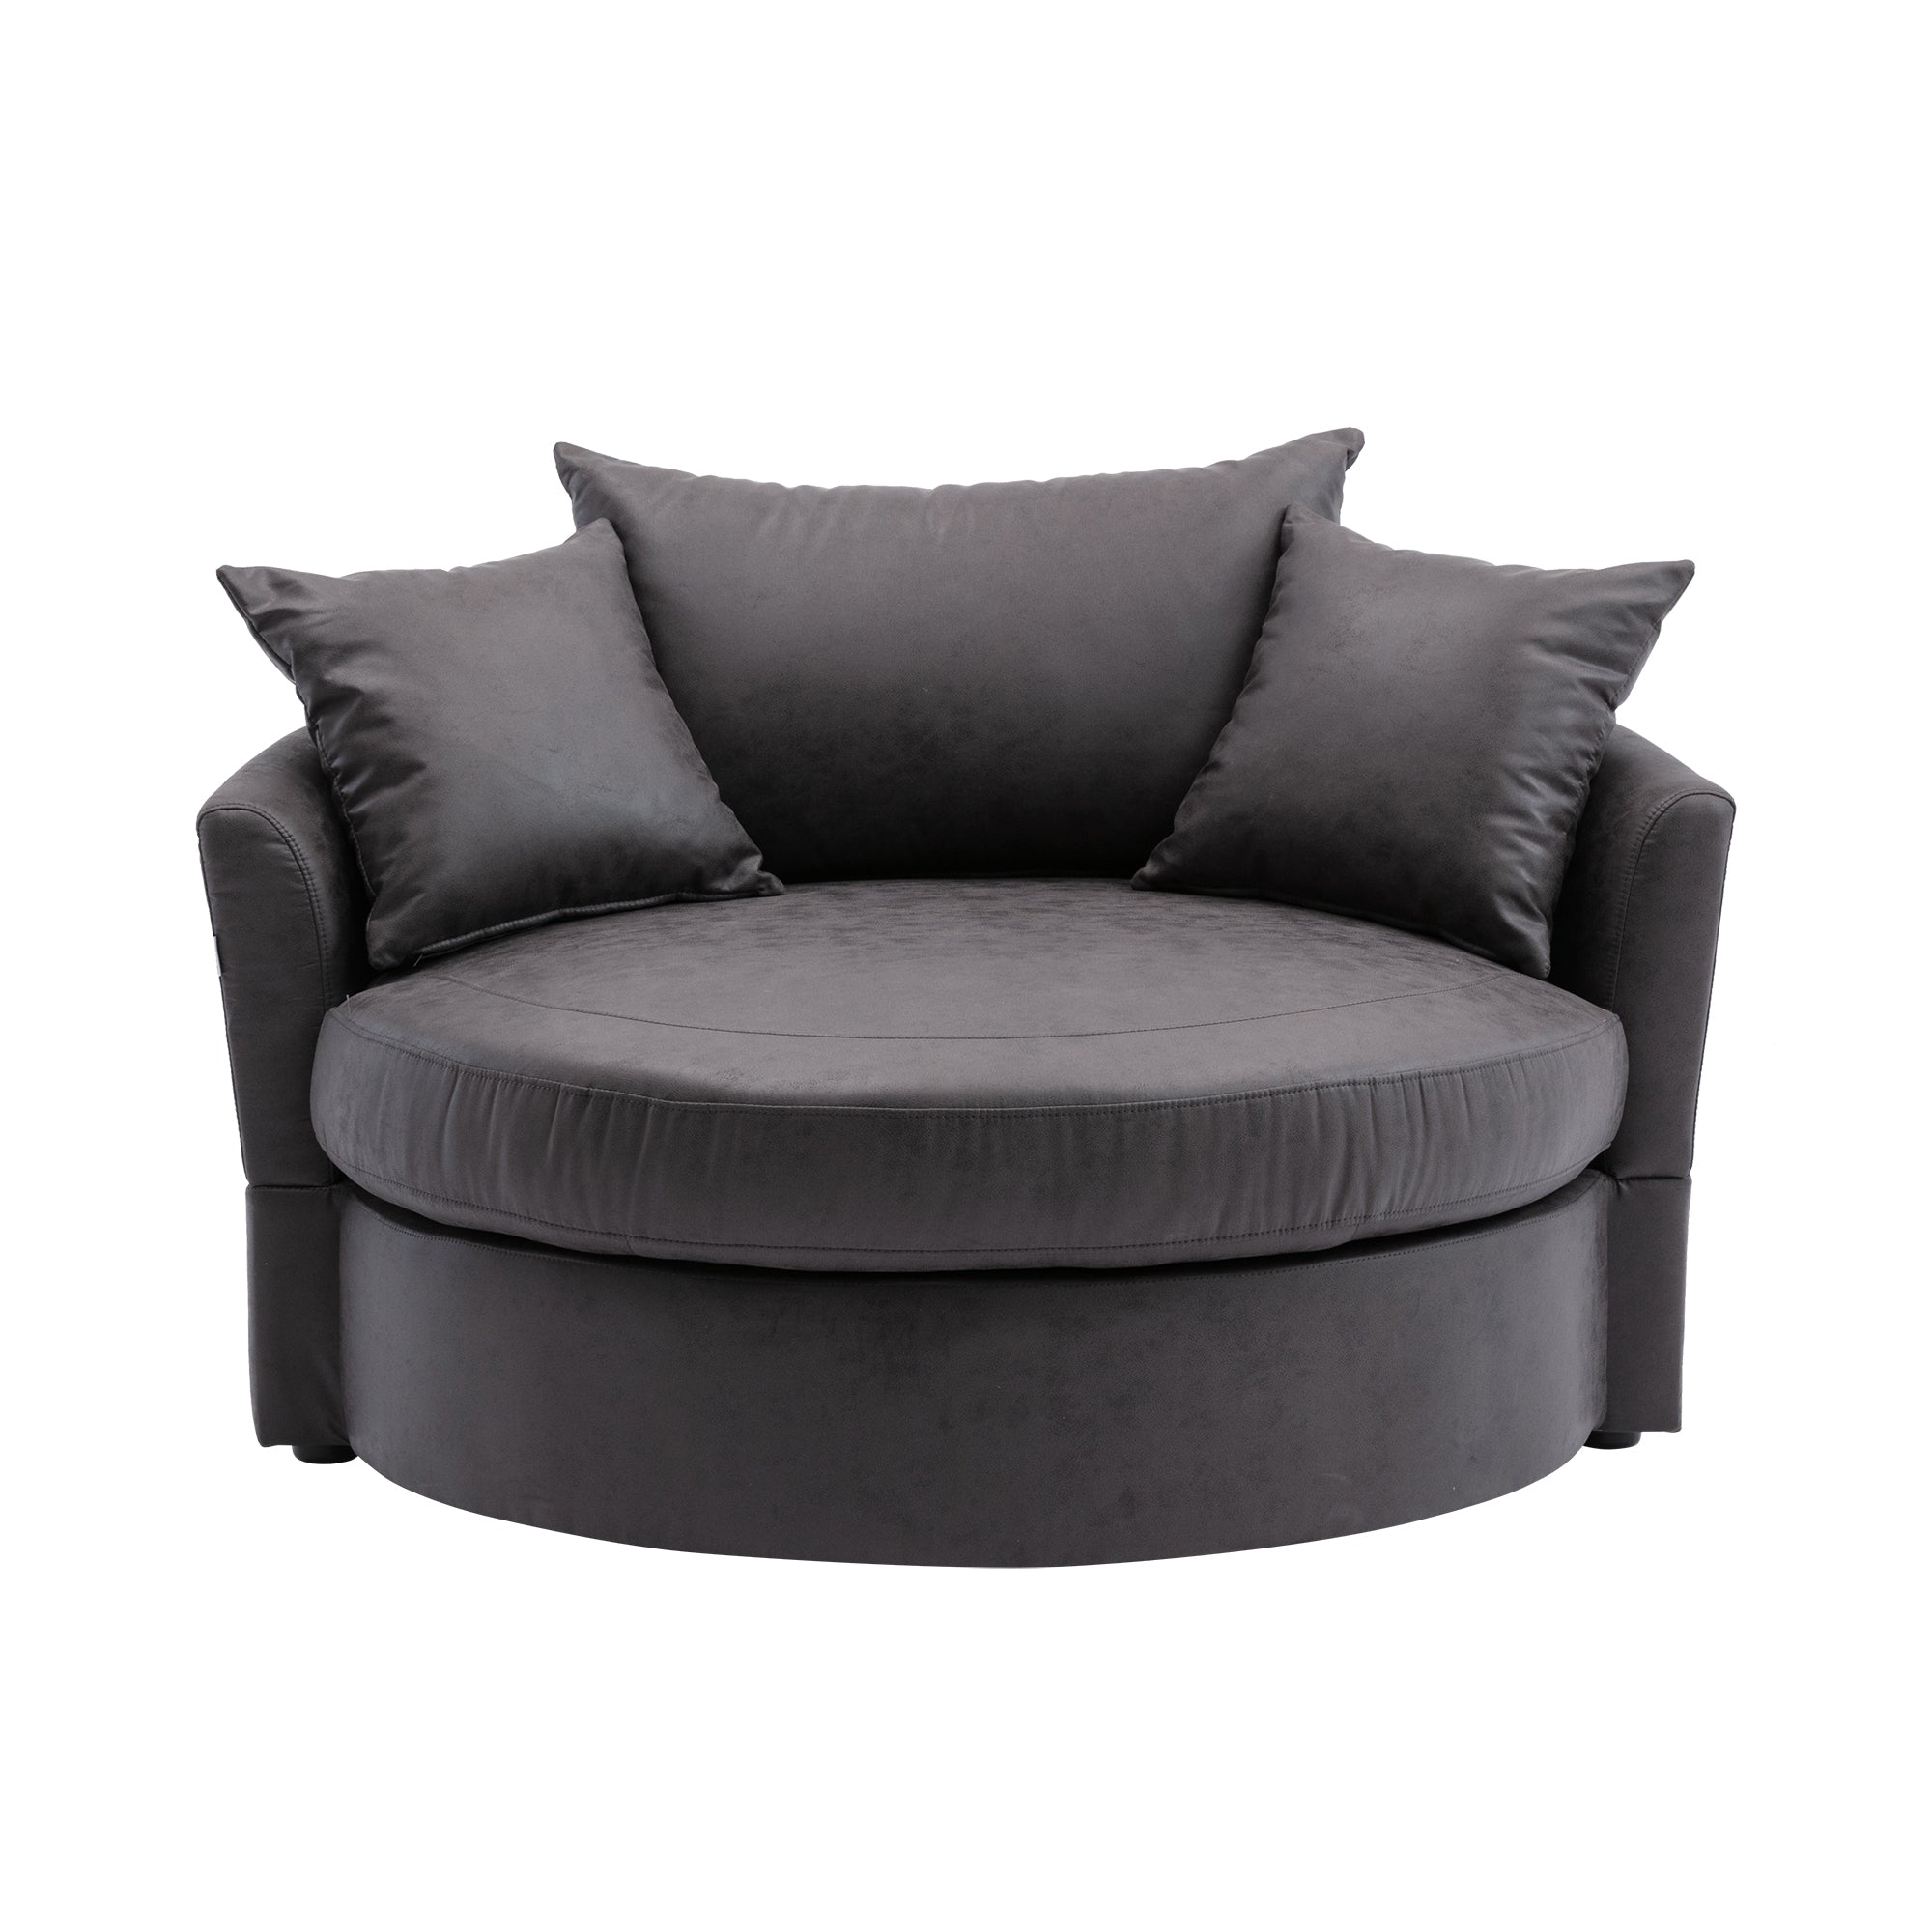 Modern  Akili swivel accent chair  barrel chair  for hotel living room / Modern  leisure chair(notice :contact us for more detail)